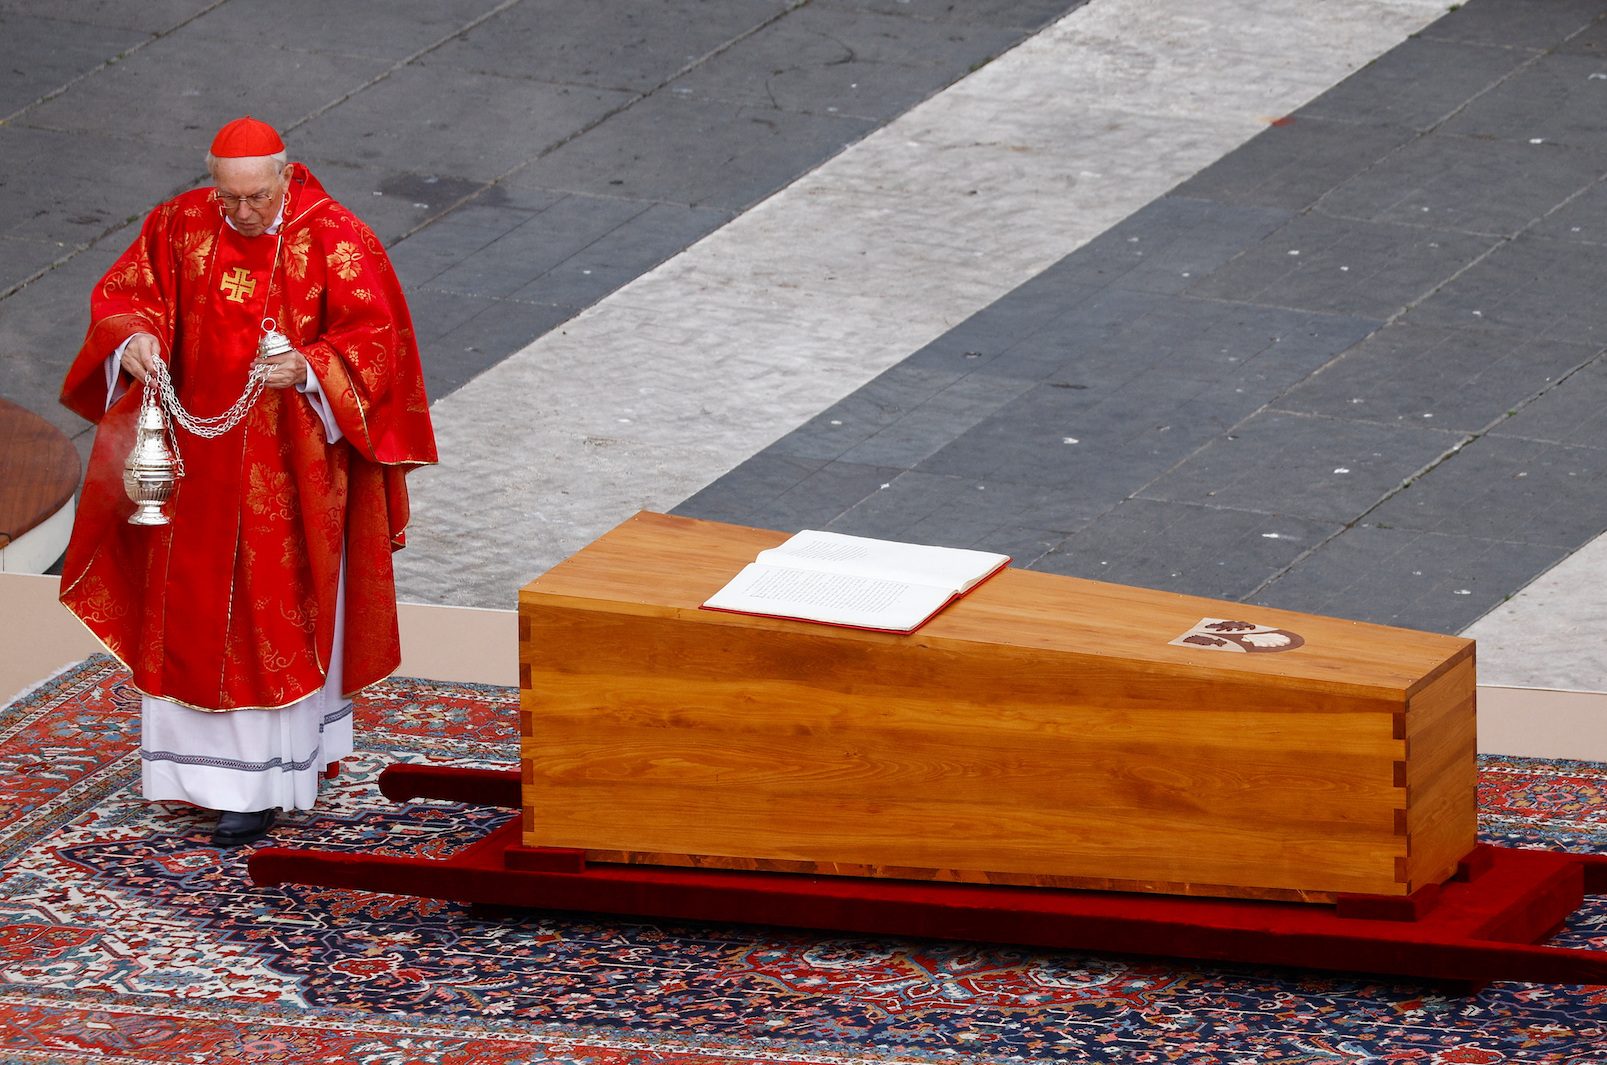 Guide to the funeral of Pope Emeritus Benedict